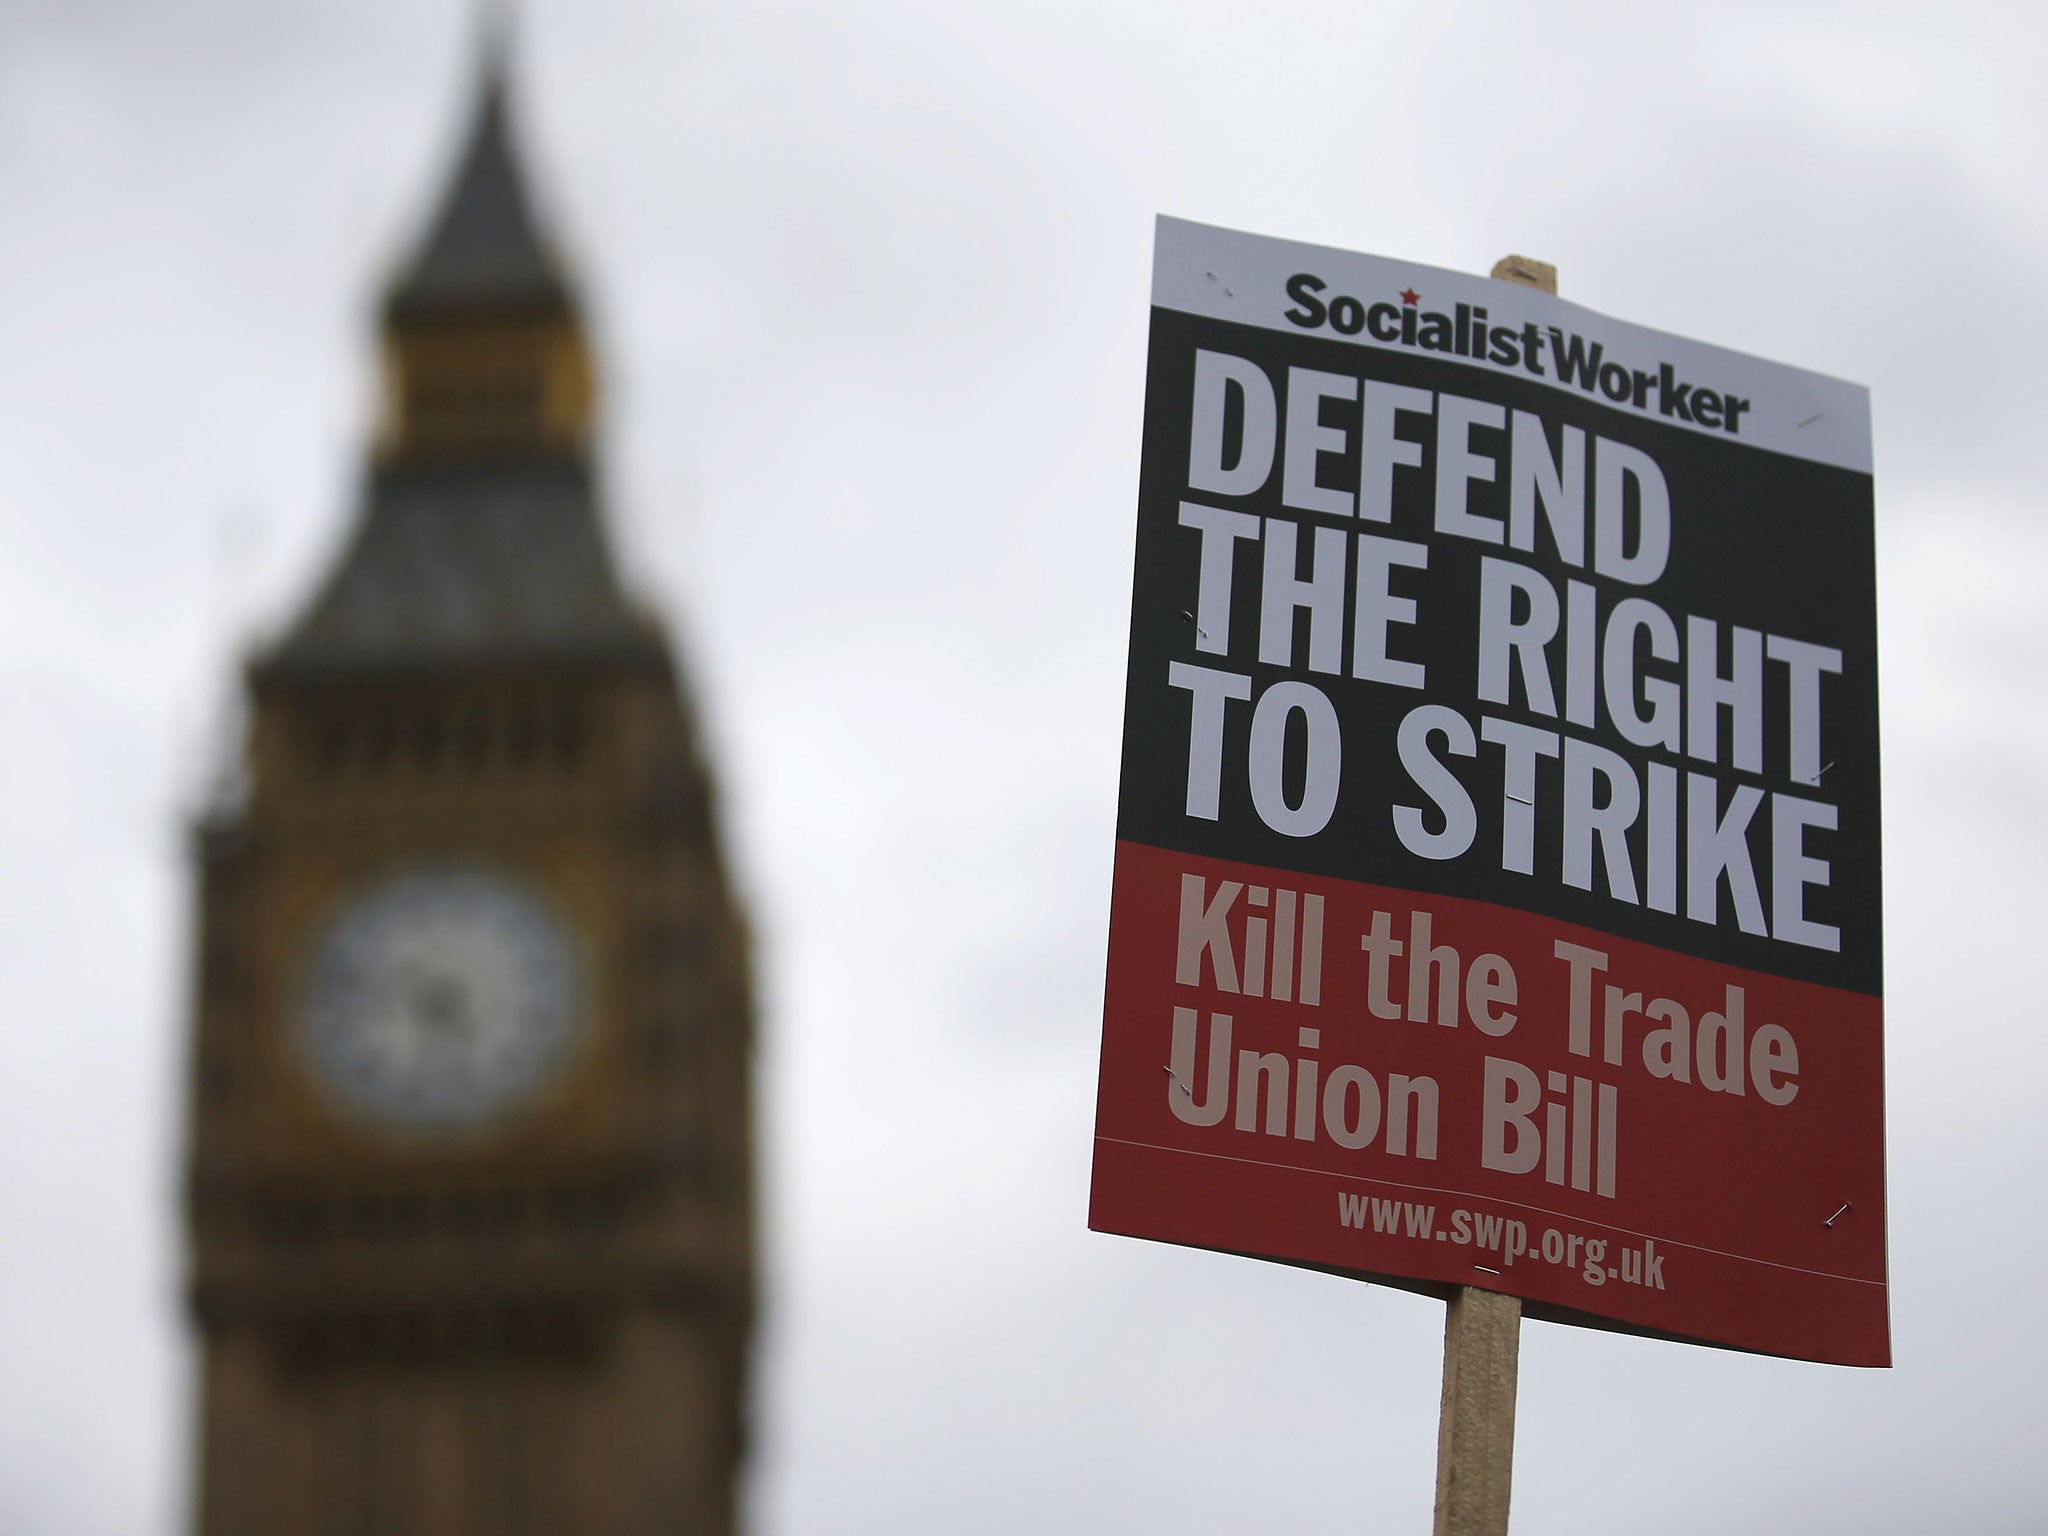 Protestors hold placards during an anti-trade union bill demonstration outside the Houses of Parliament in central London on 14 September, 2015